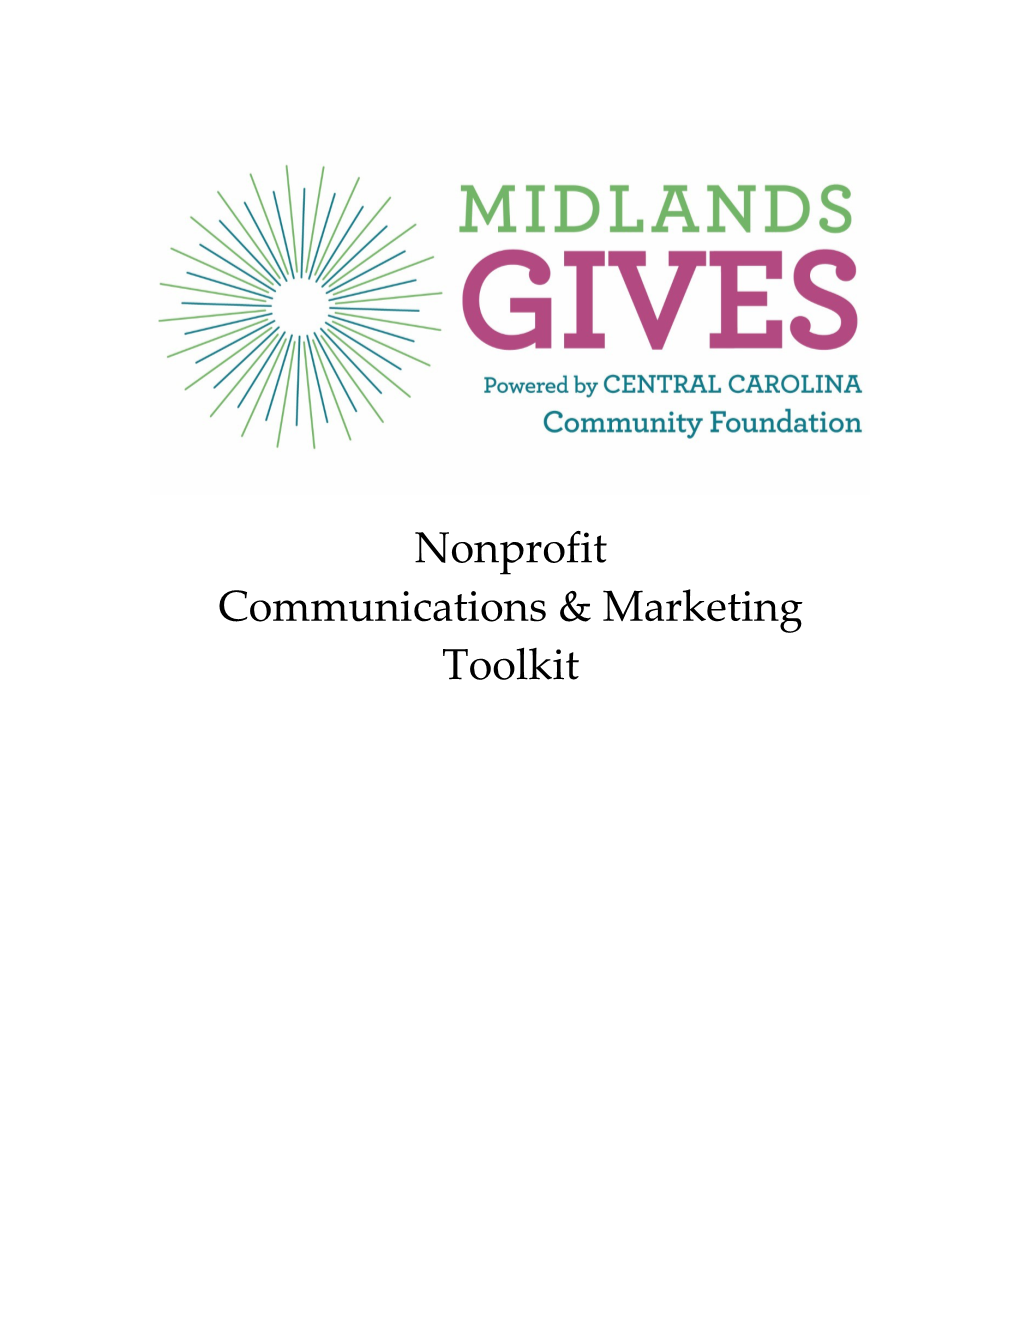 What Is Midlands Gives?